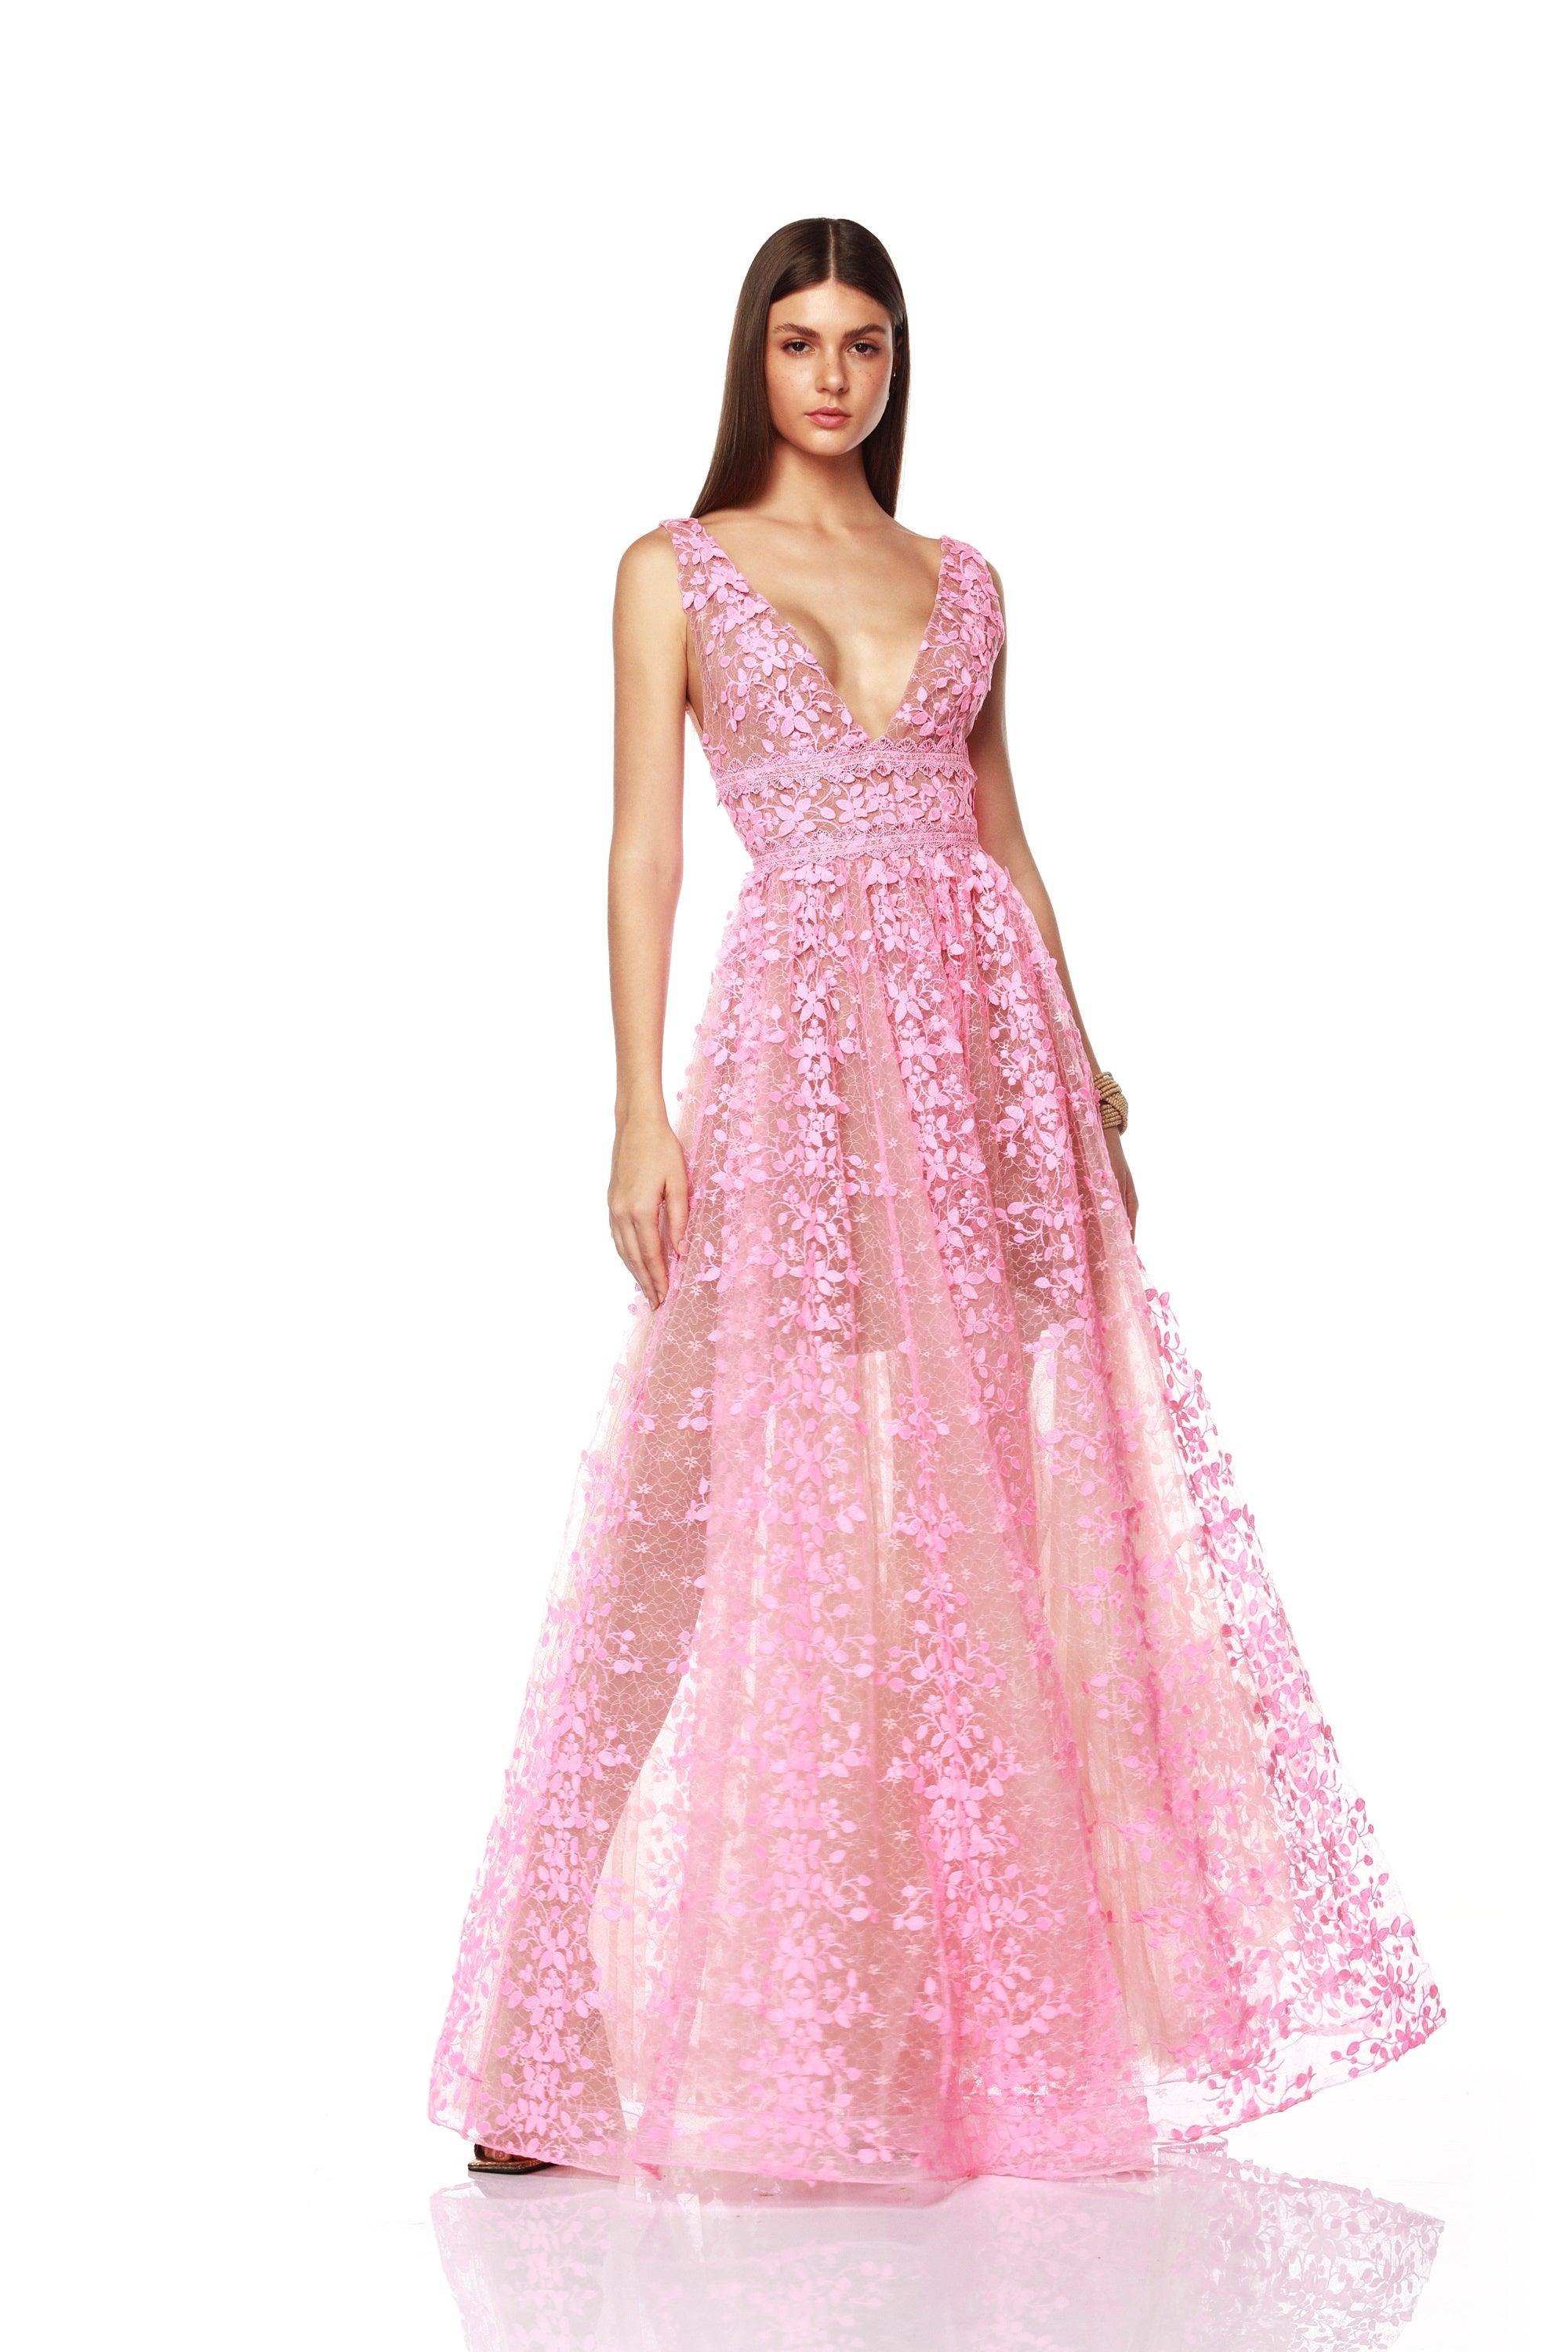 Pink Tulle Lace Long Ball Gown Dress Formal Dress | Ball gowns, Ball gown  dresses, Gowns